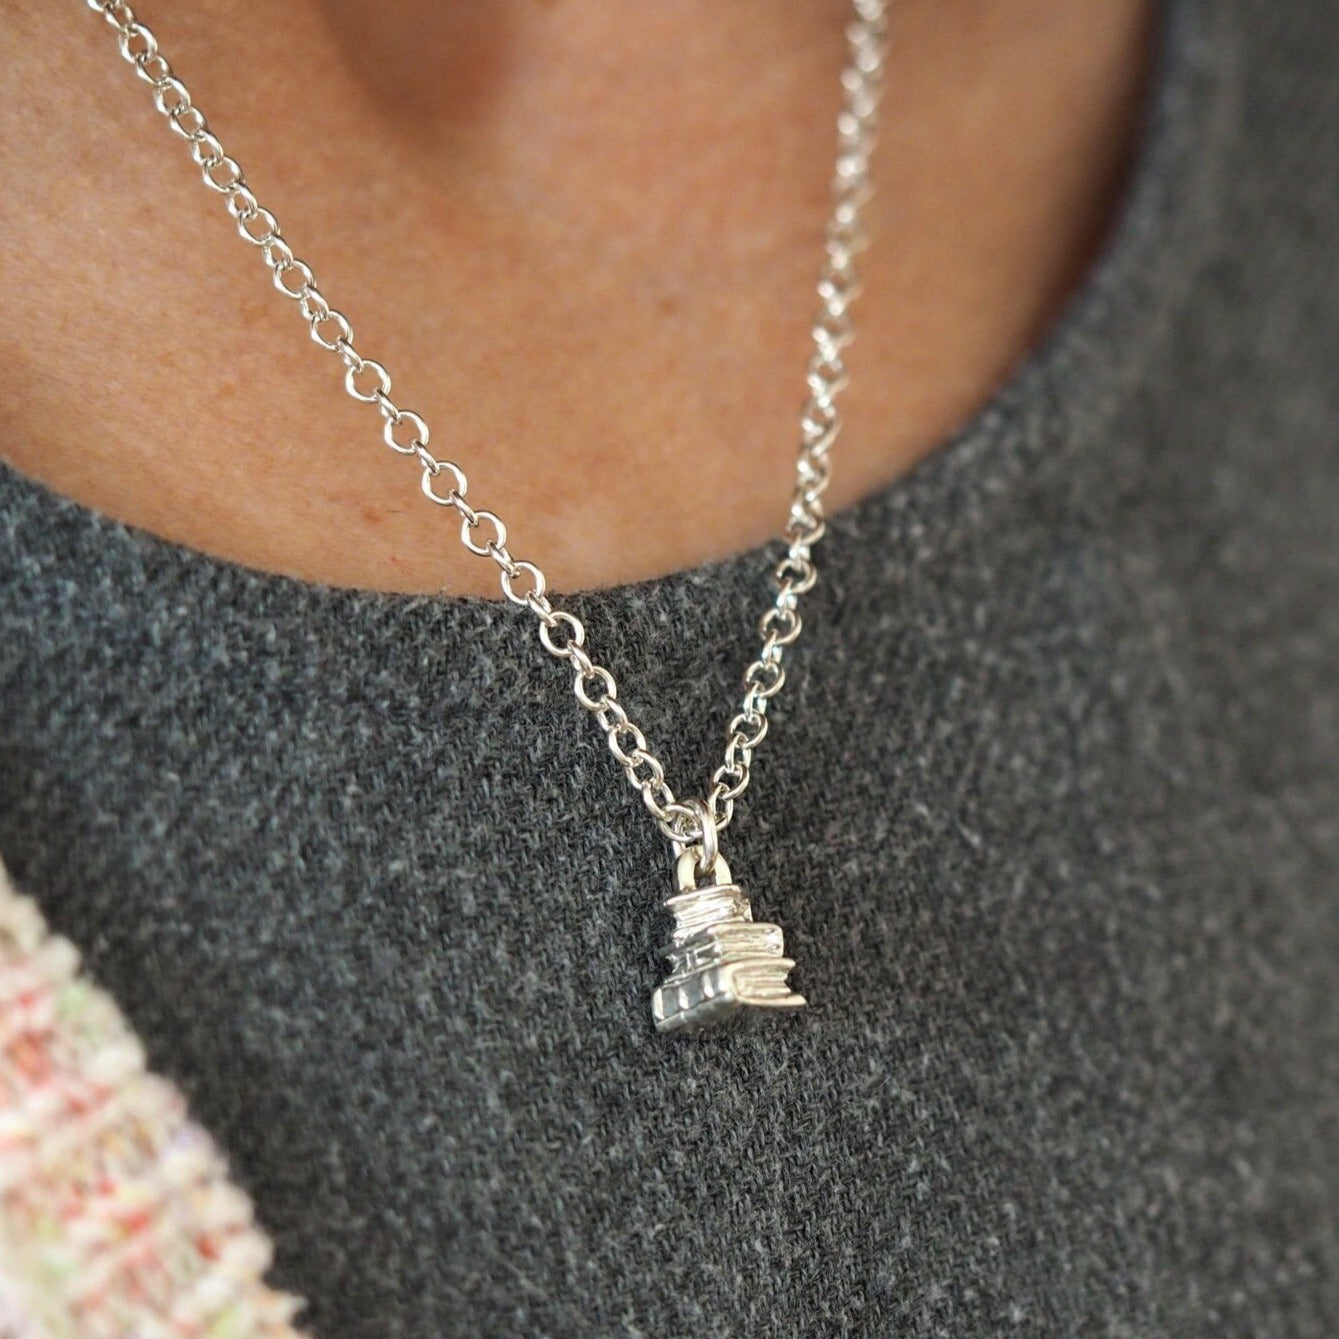 Book Pile Necklace - Sterling Silver